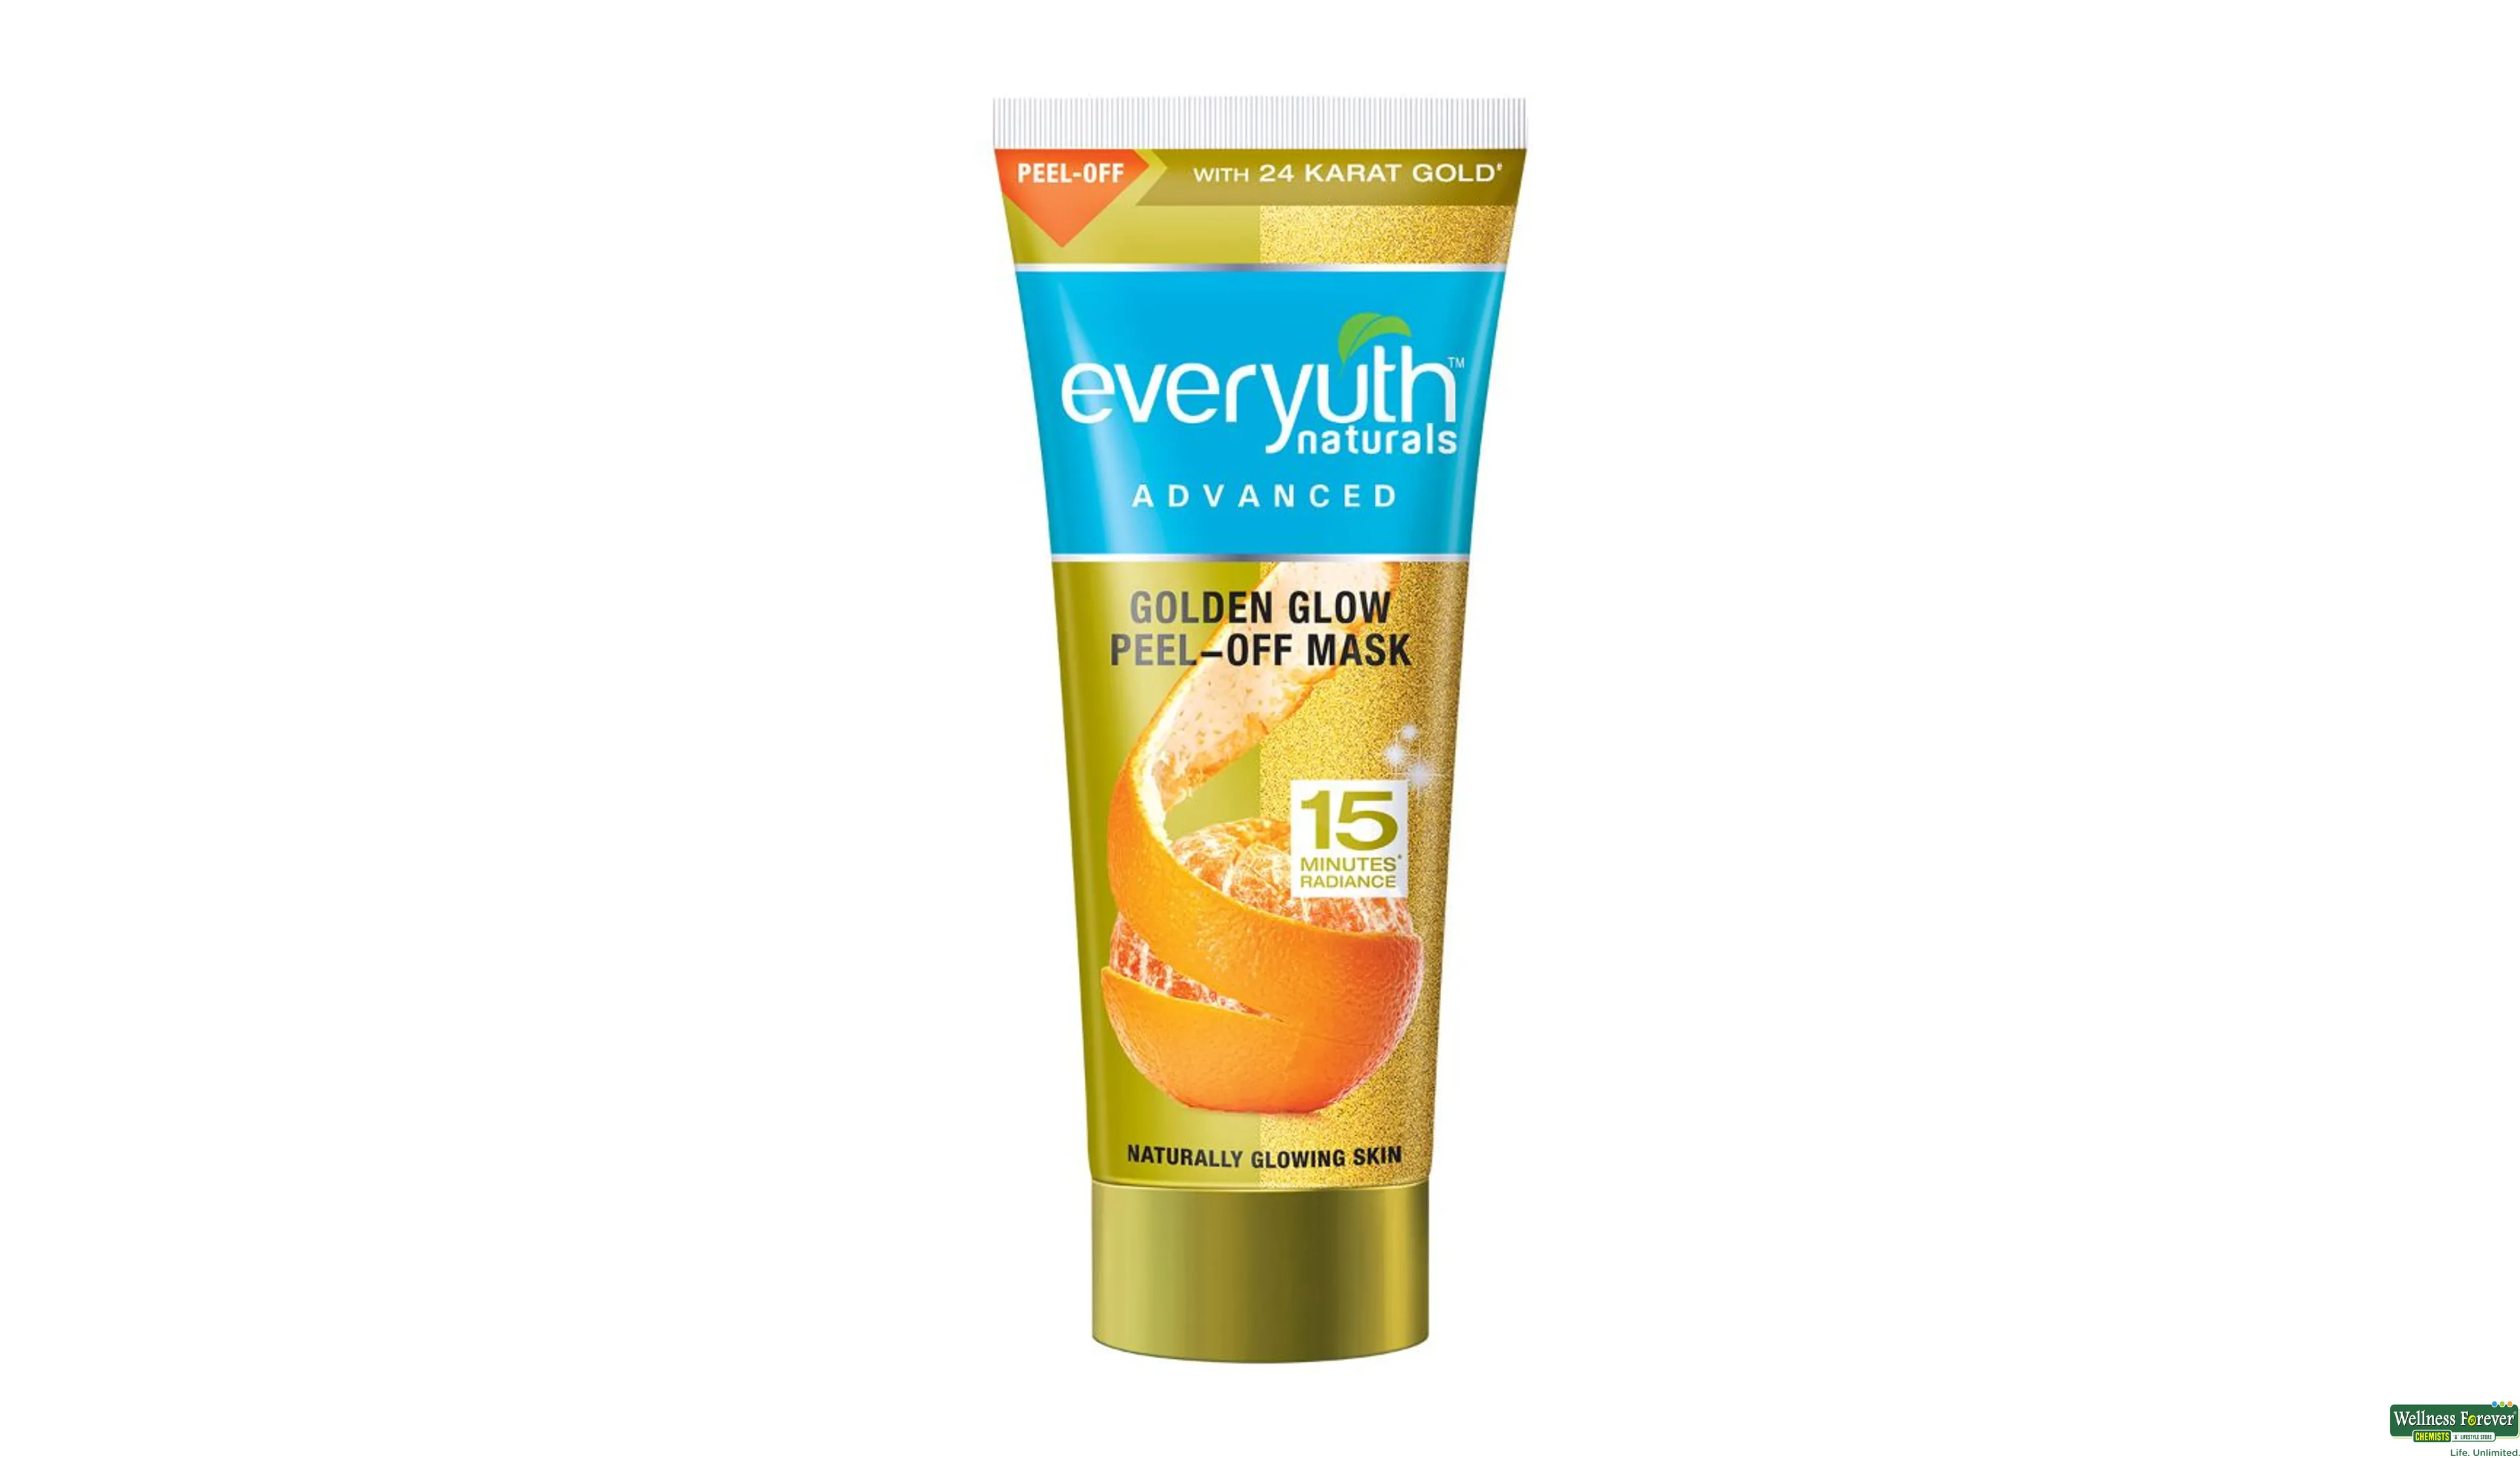 EVERYUTH F/MASK PEEL OFF GOLD/GLOW 90GM- 1, 90GM, 